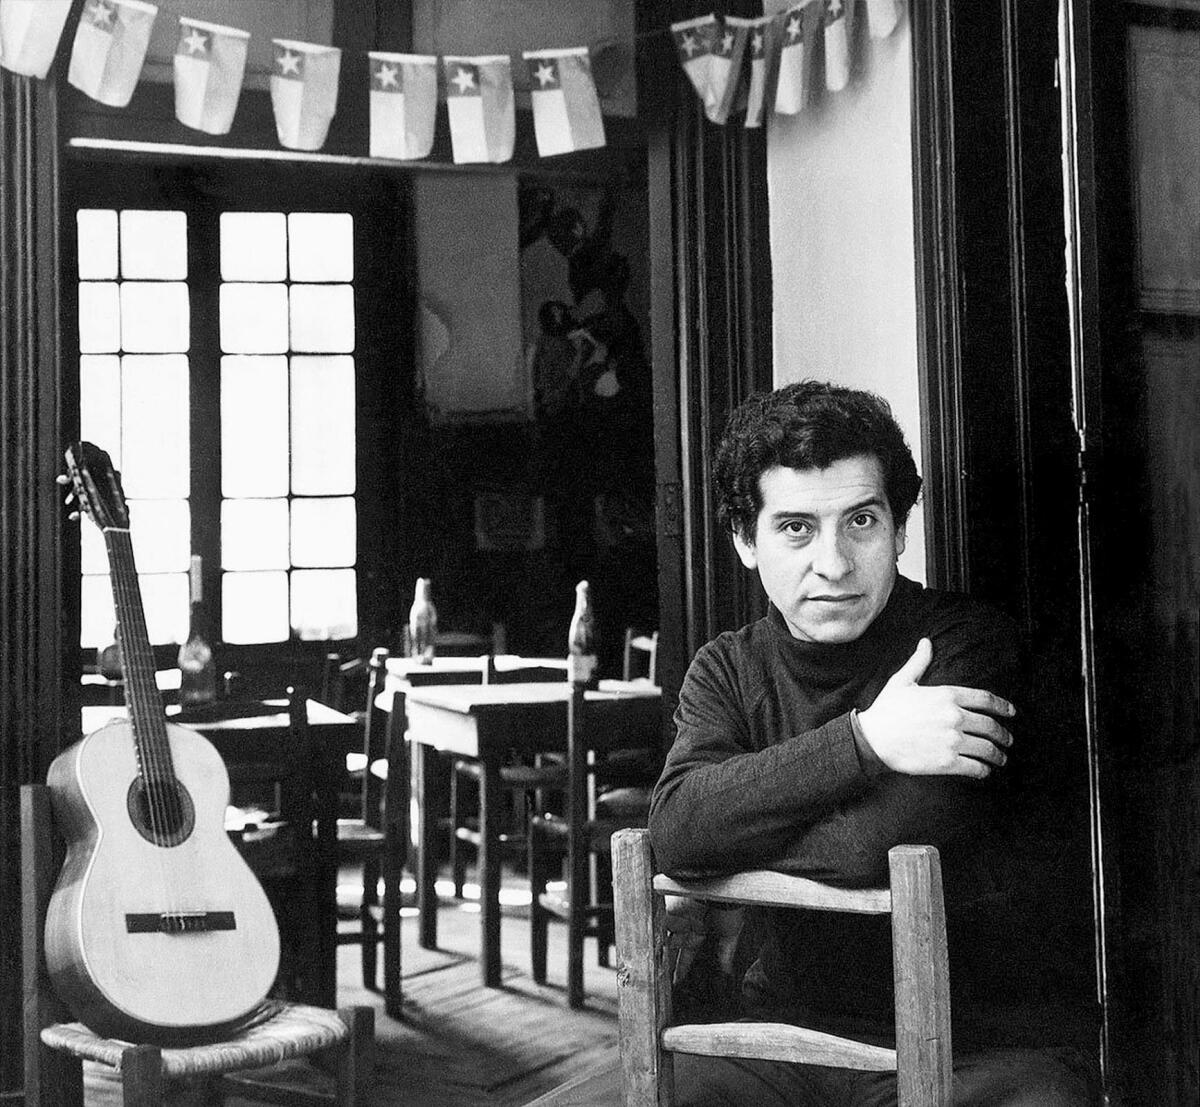 Victor Jara was a folk singer in Chile. His family has filed a civil lawsuit that accuses former Chilean army Lt. Pedro Barrientos Nunez of participating in the torture and murder of Jara.